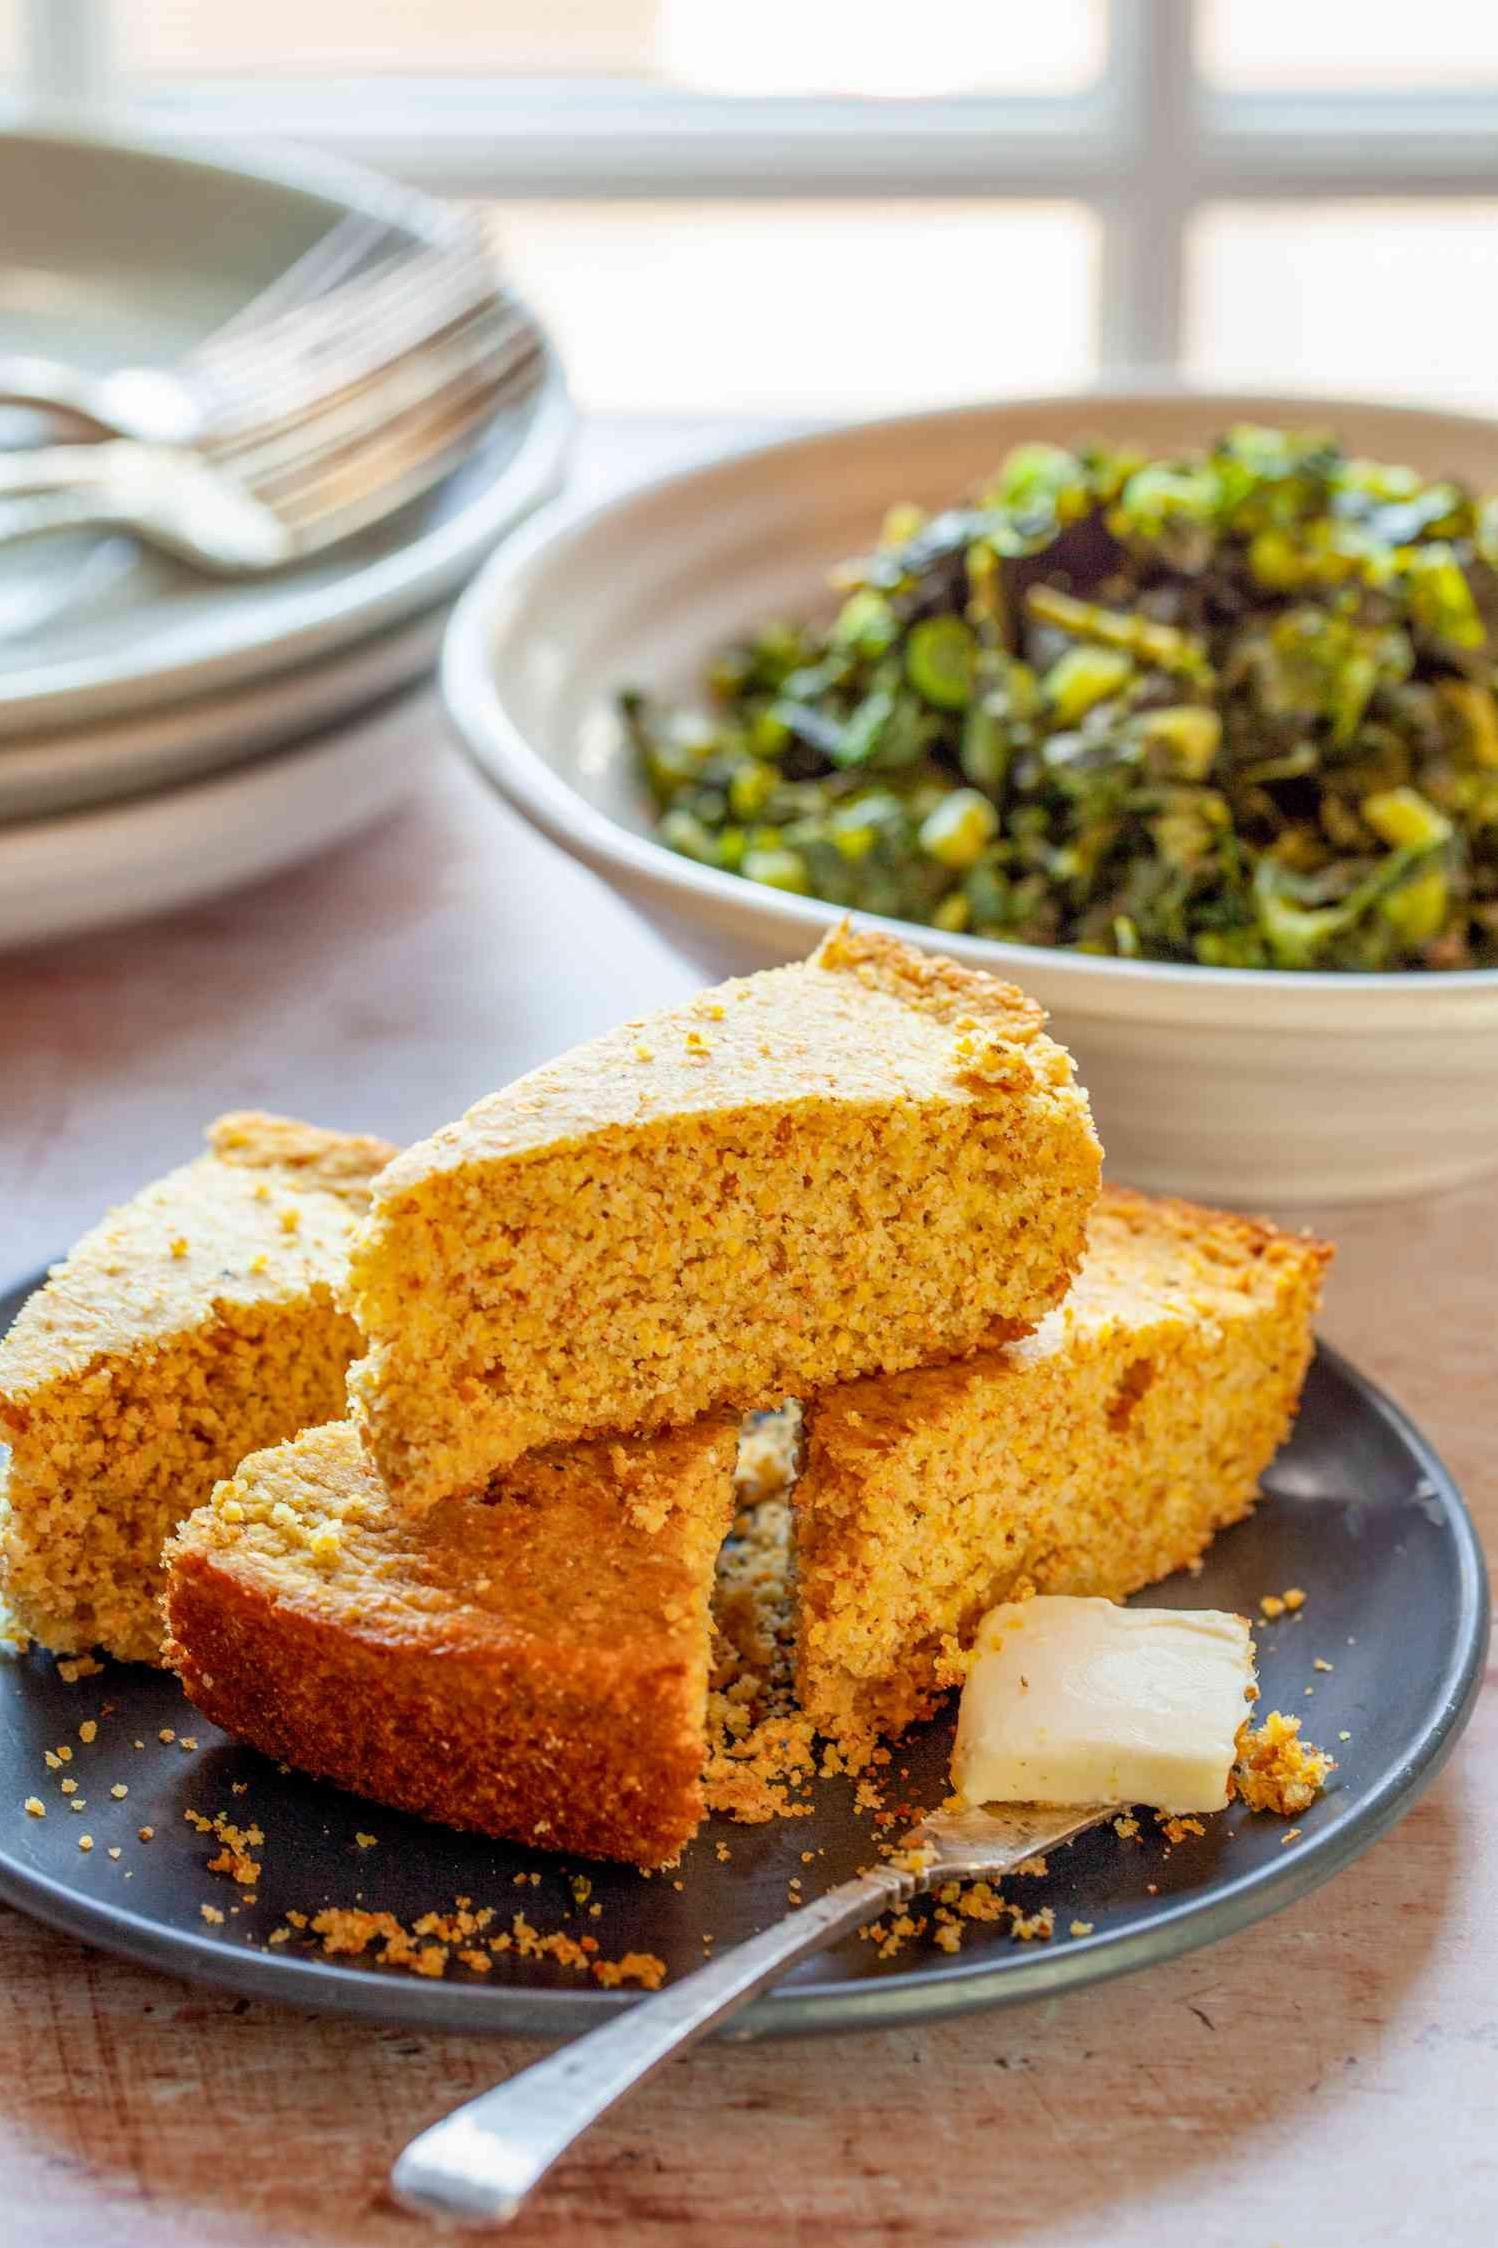  The perfect sidekick for any dish: homemade southern cornbread